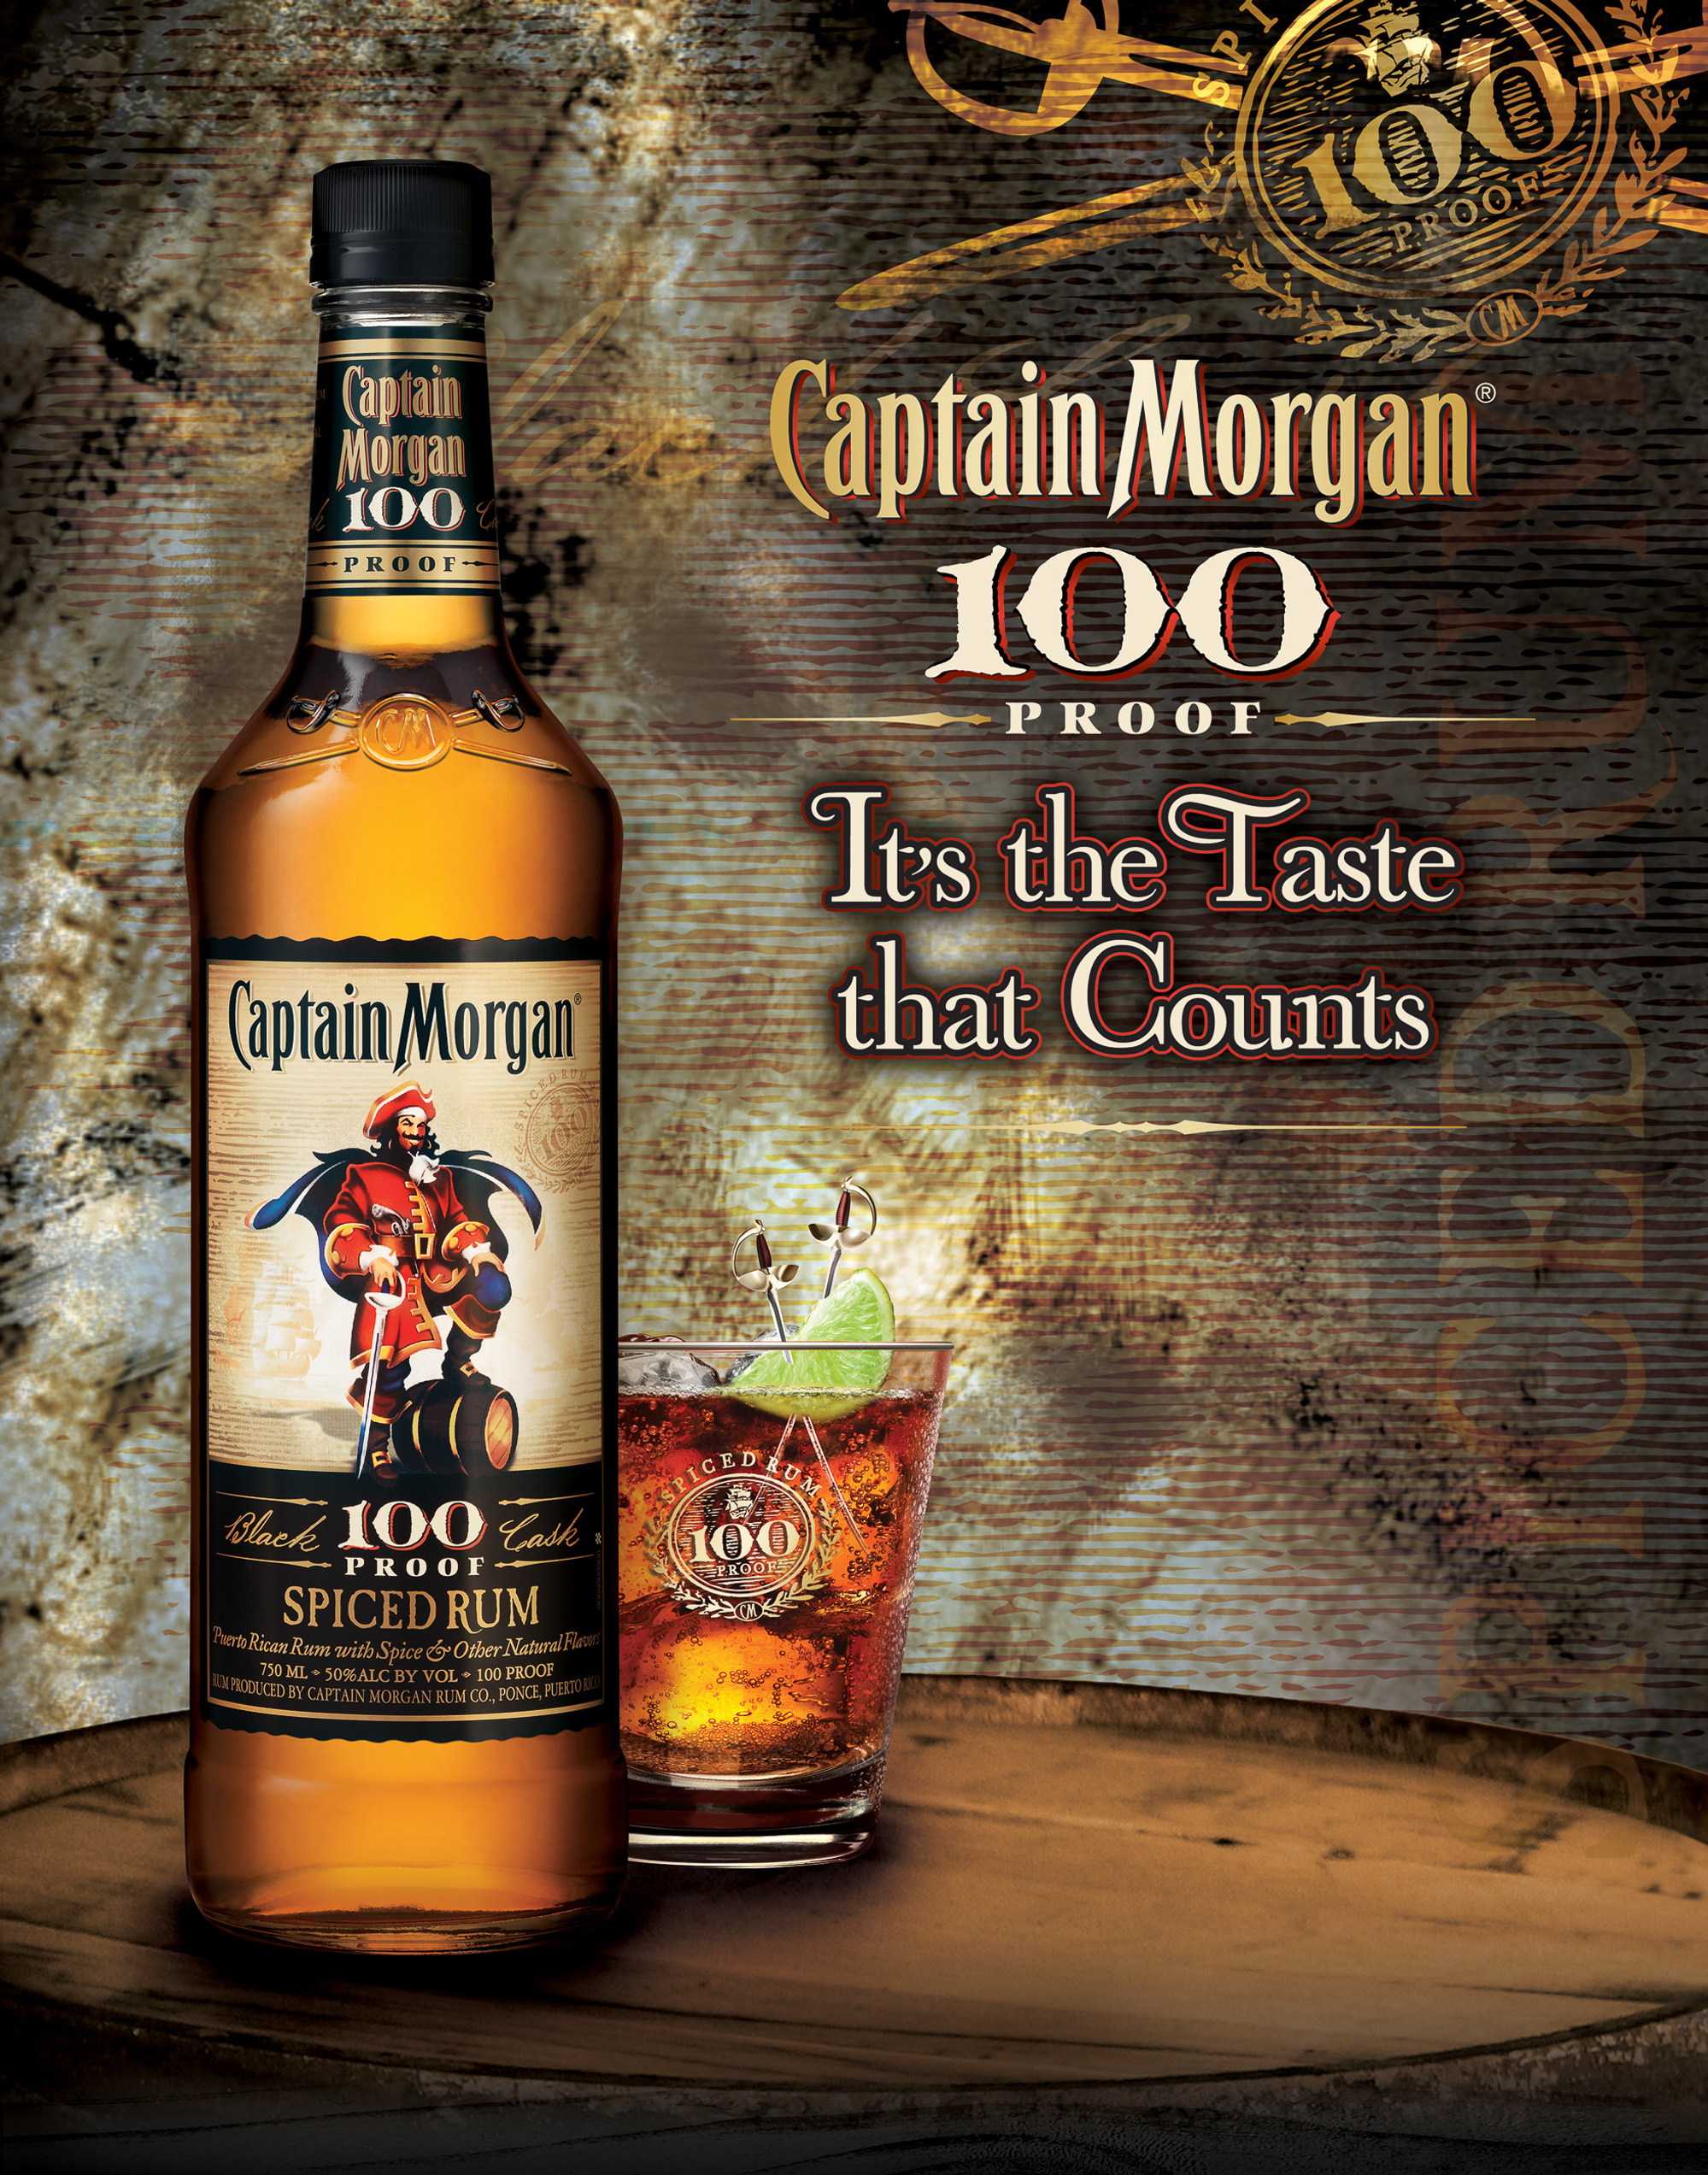 Captain Morgan Spiced Rum tear sheet. Beverage and liquor product and advertising photography by Timothy Hogan in Los Angeles